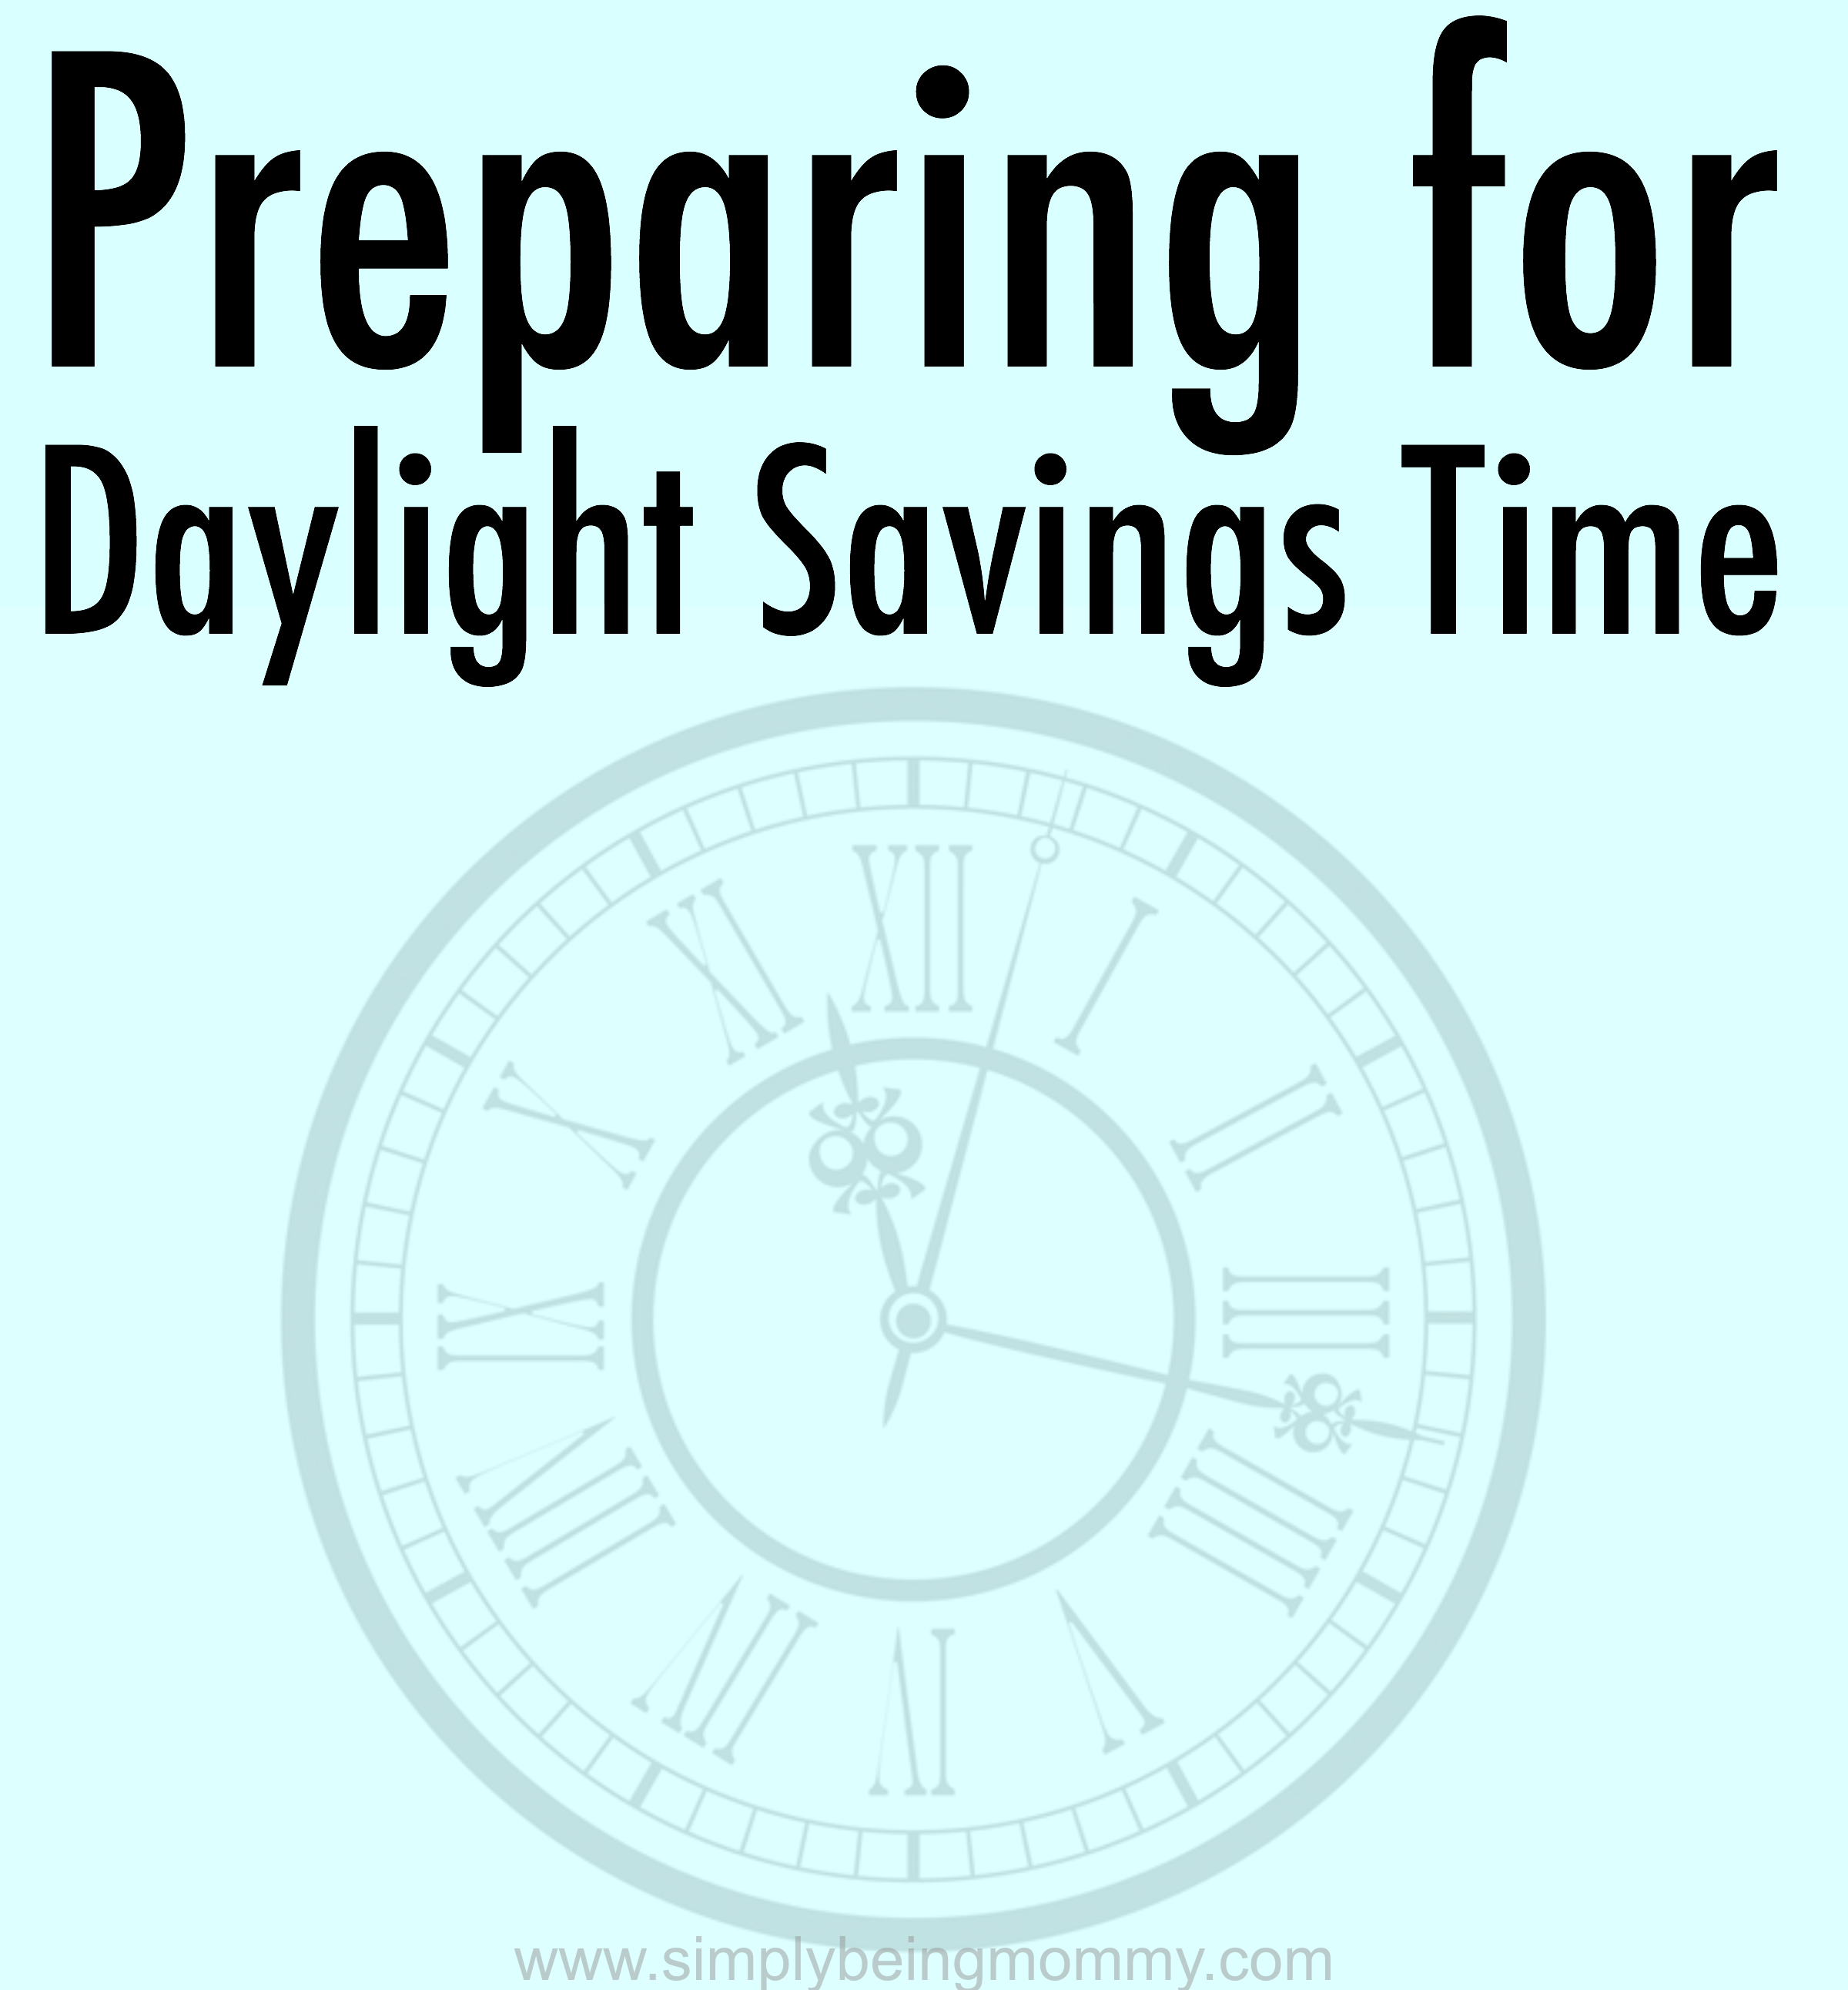 outlook for mac daylight savings time